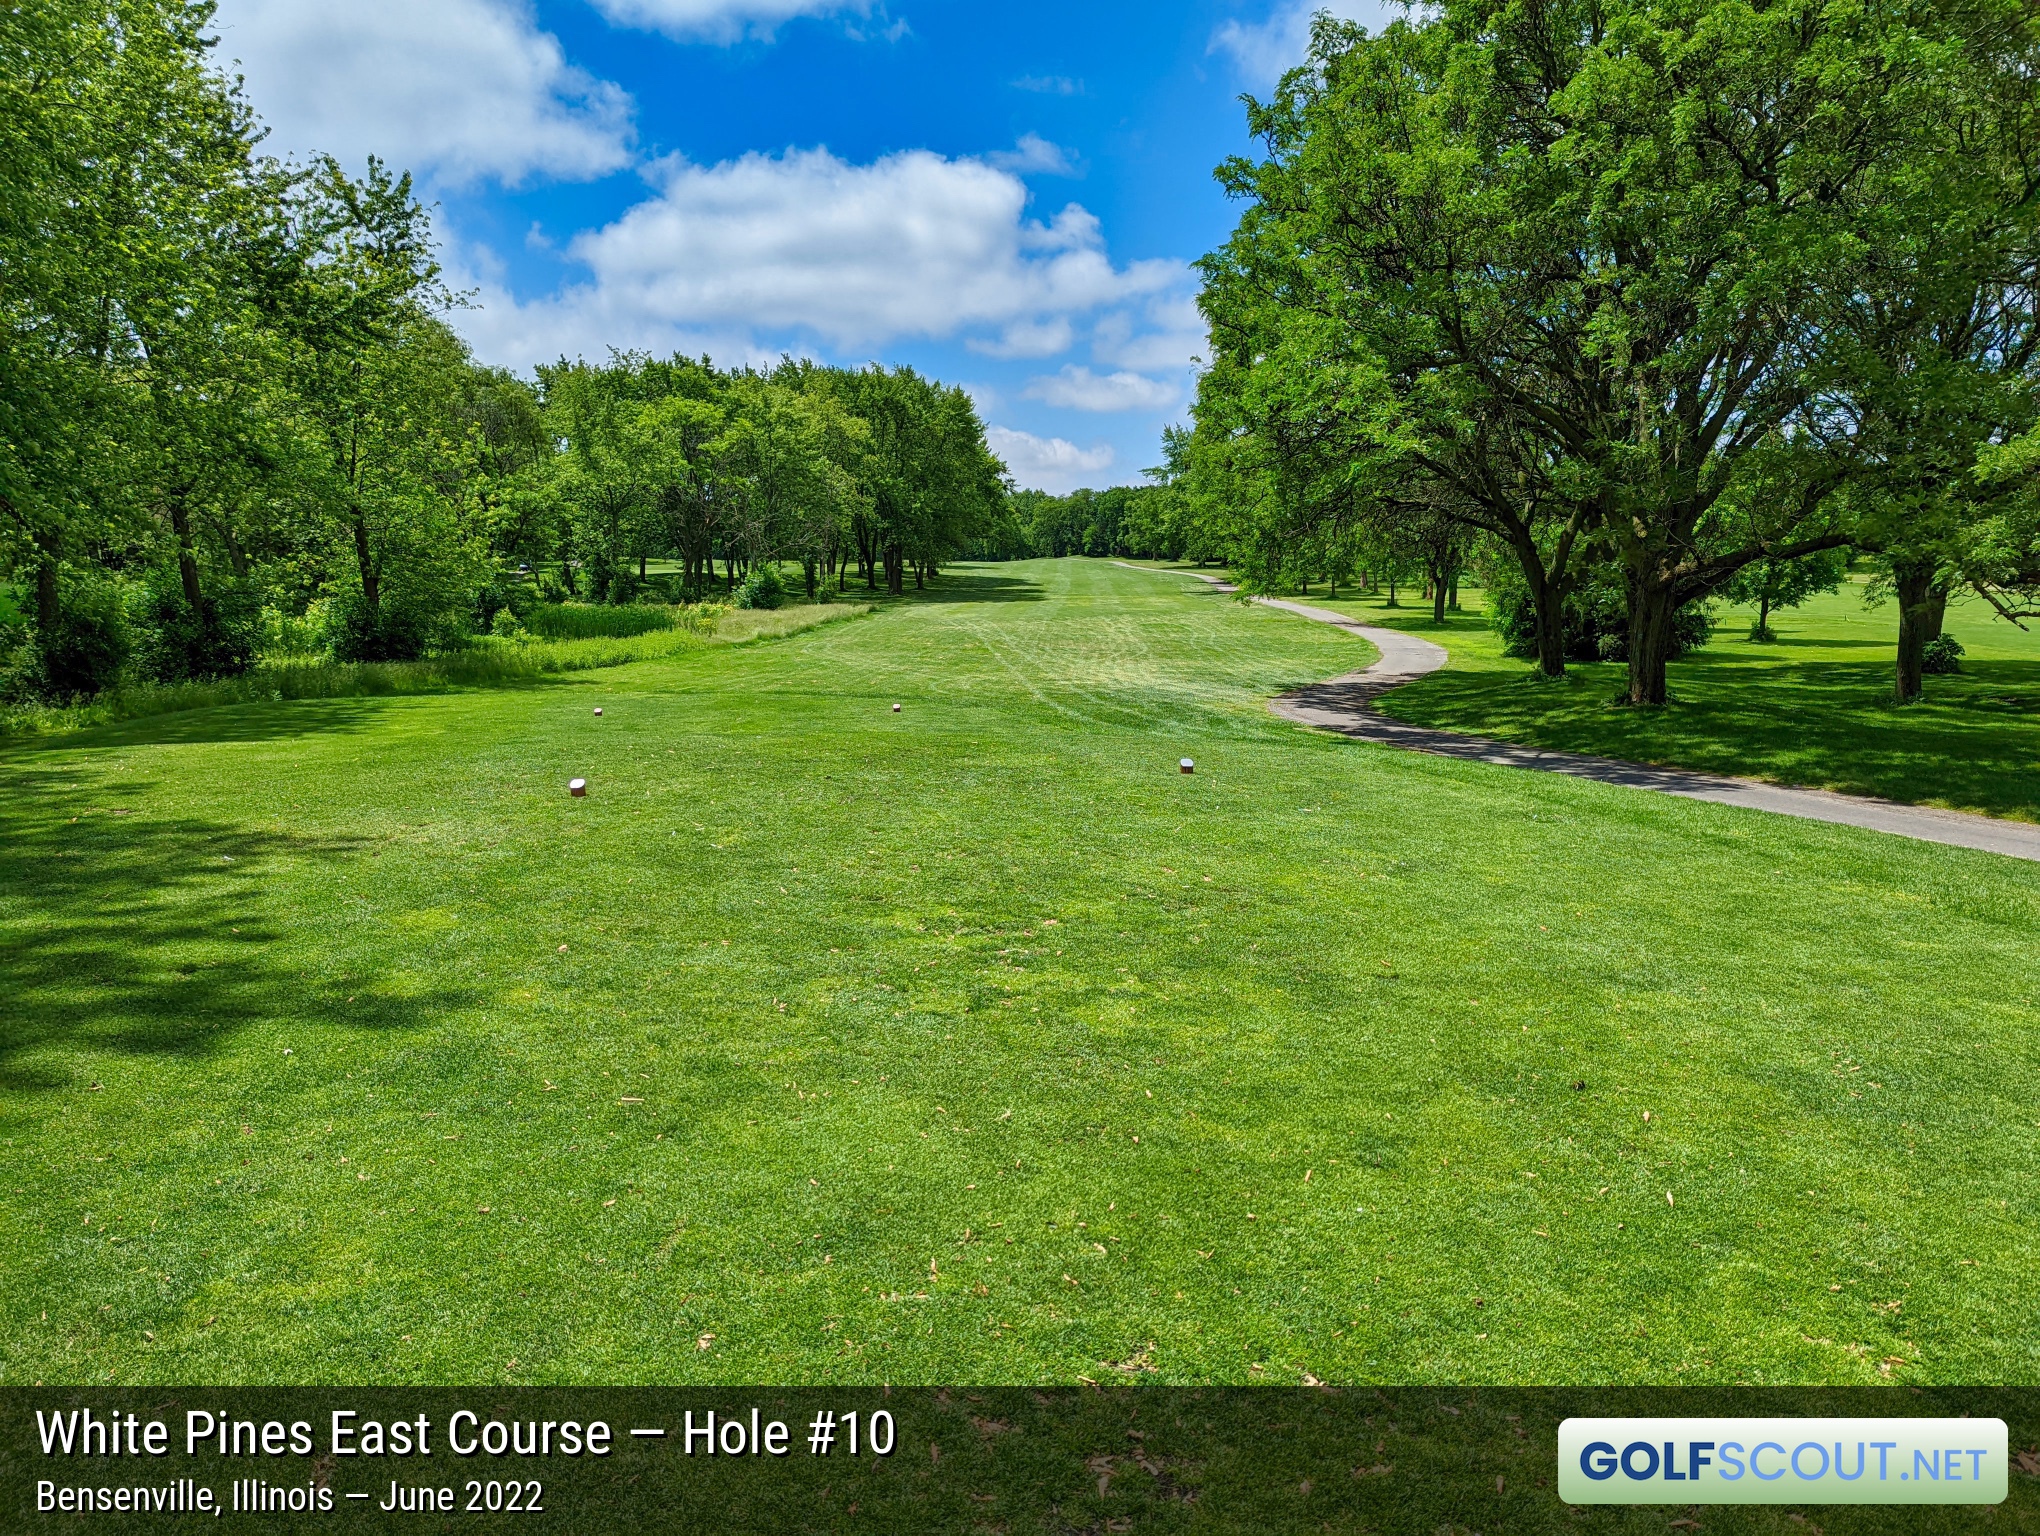 Photo of hole #10 at White Pines East Course in Bensenville, Illinois. 